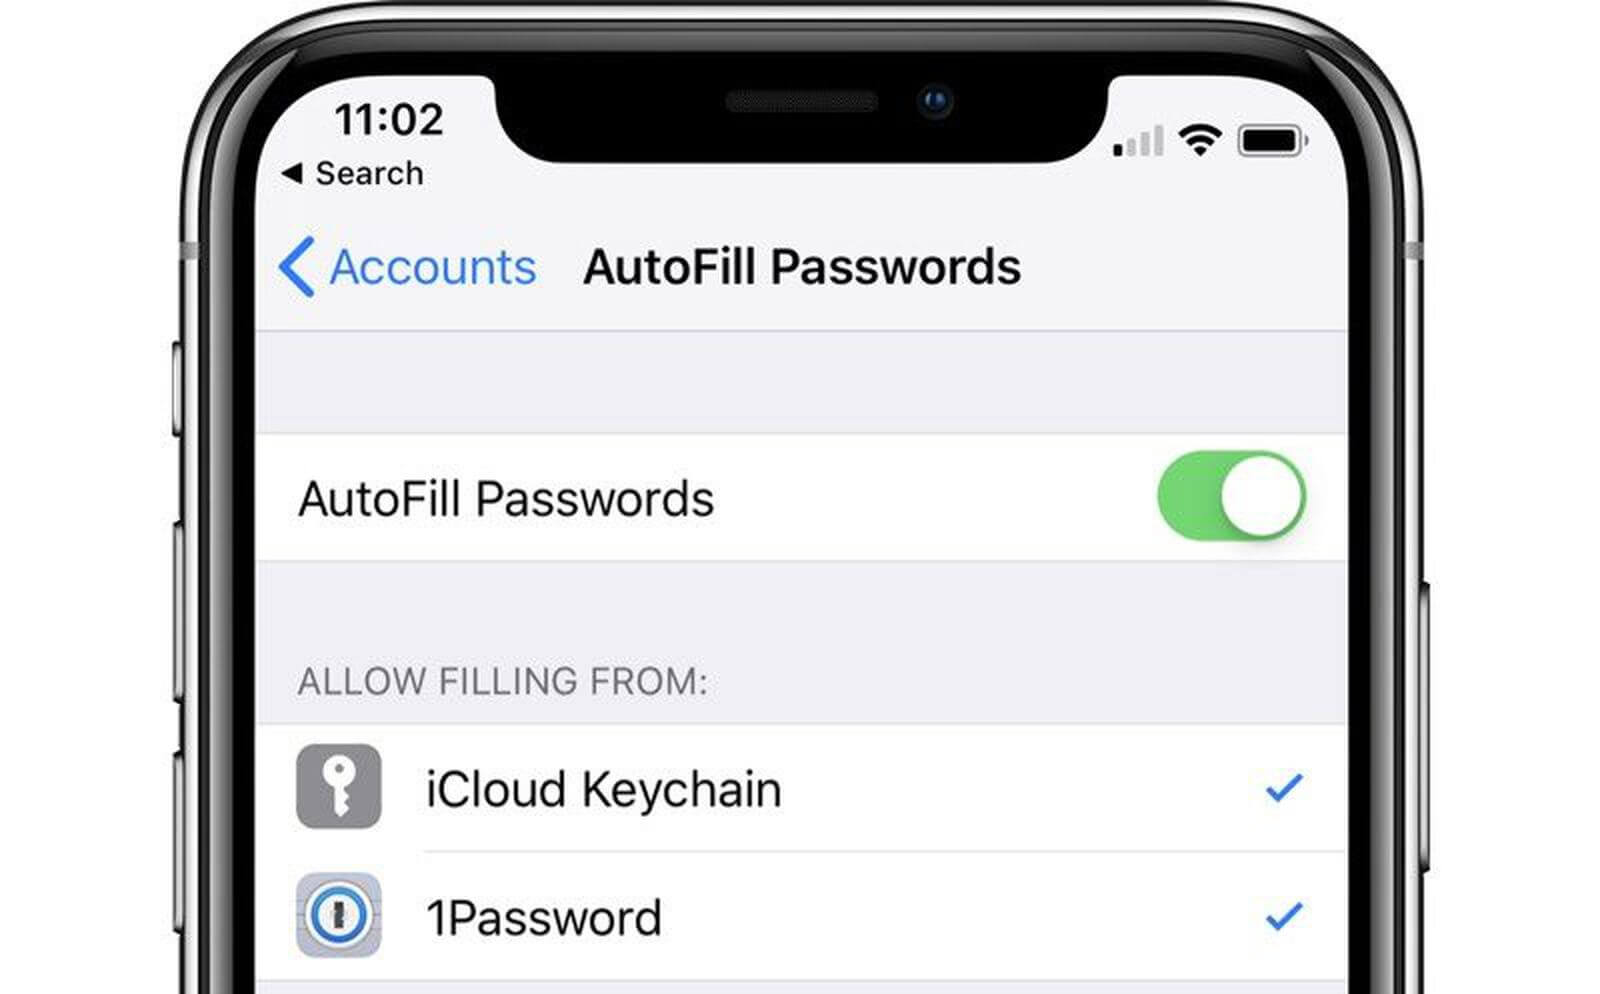 enable autofill for 1password